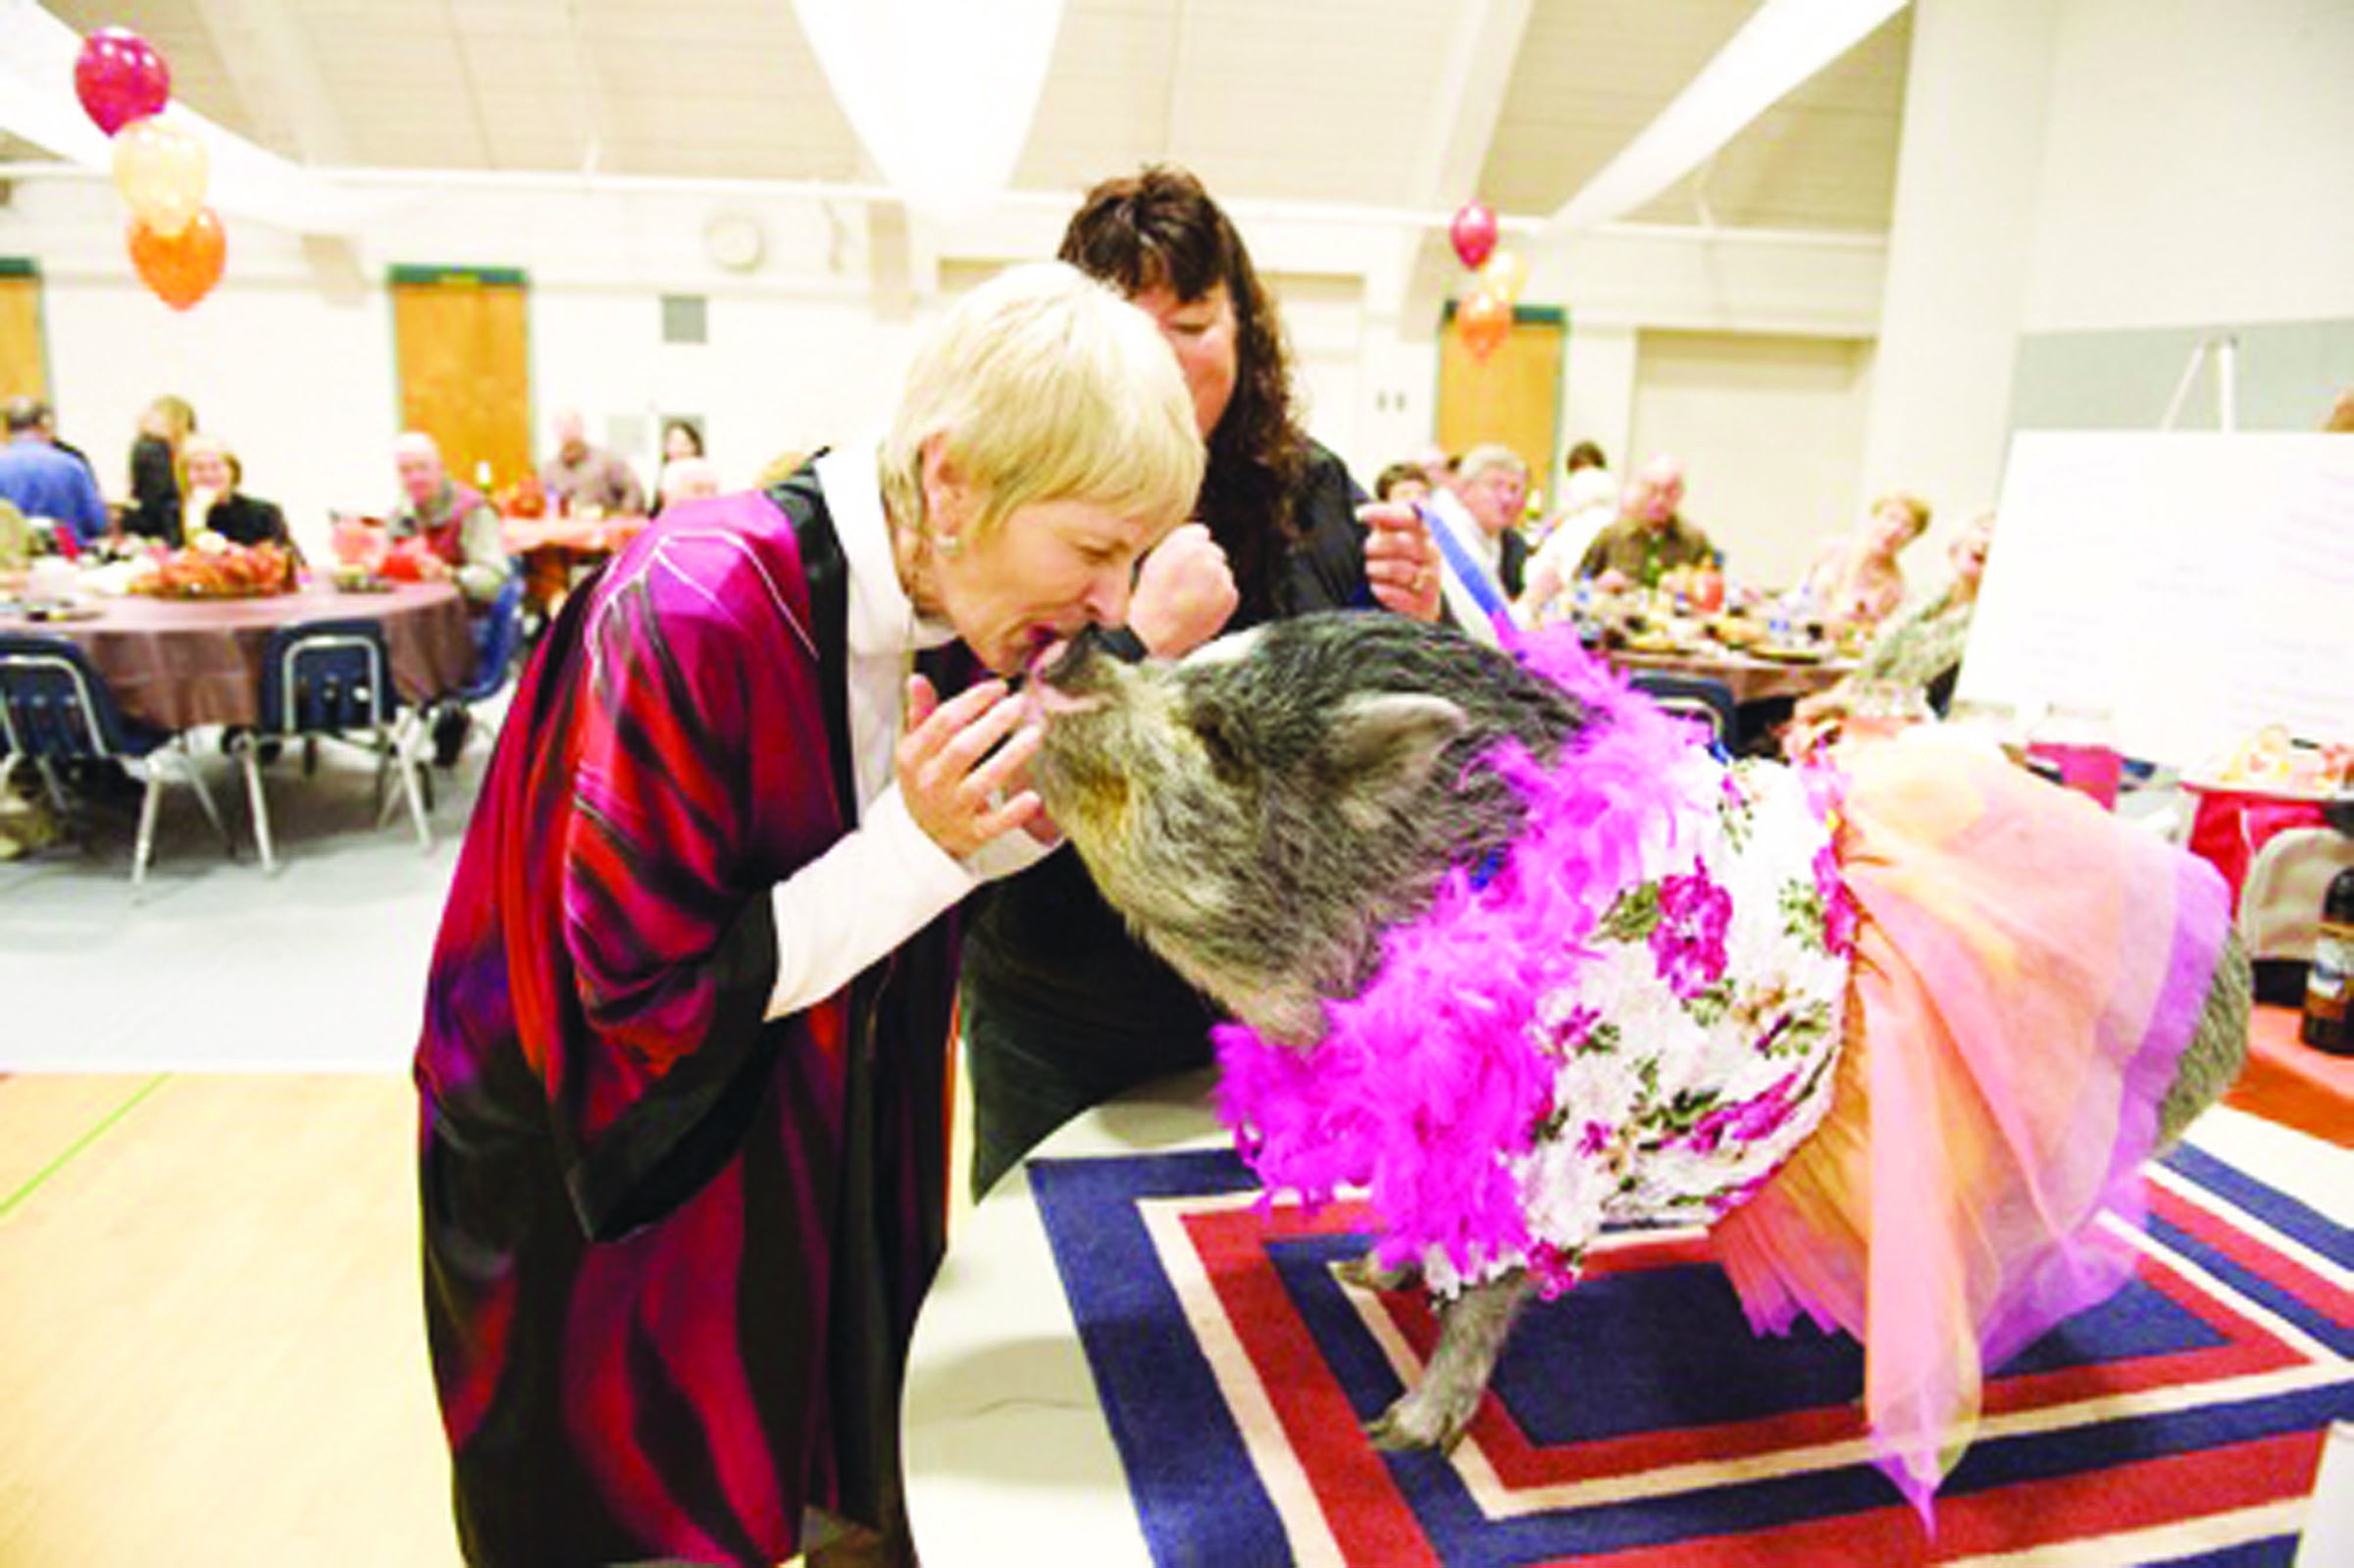 D Bellamente of the Port Angeles Senior Center puckers up to kiss a dressed-up pot-bellied pig at last year's Harvest Benefit Dinner. Park View Villas